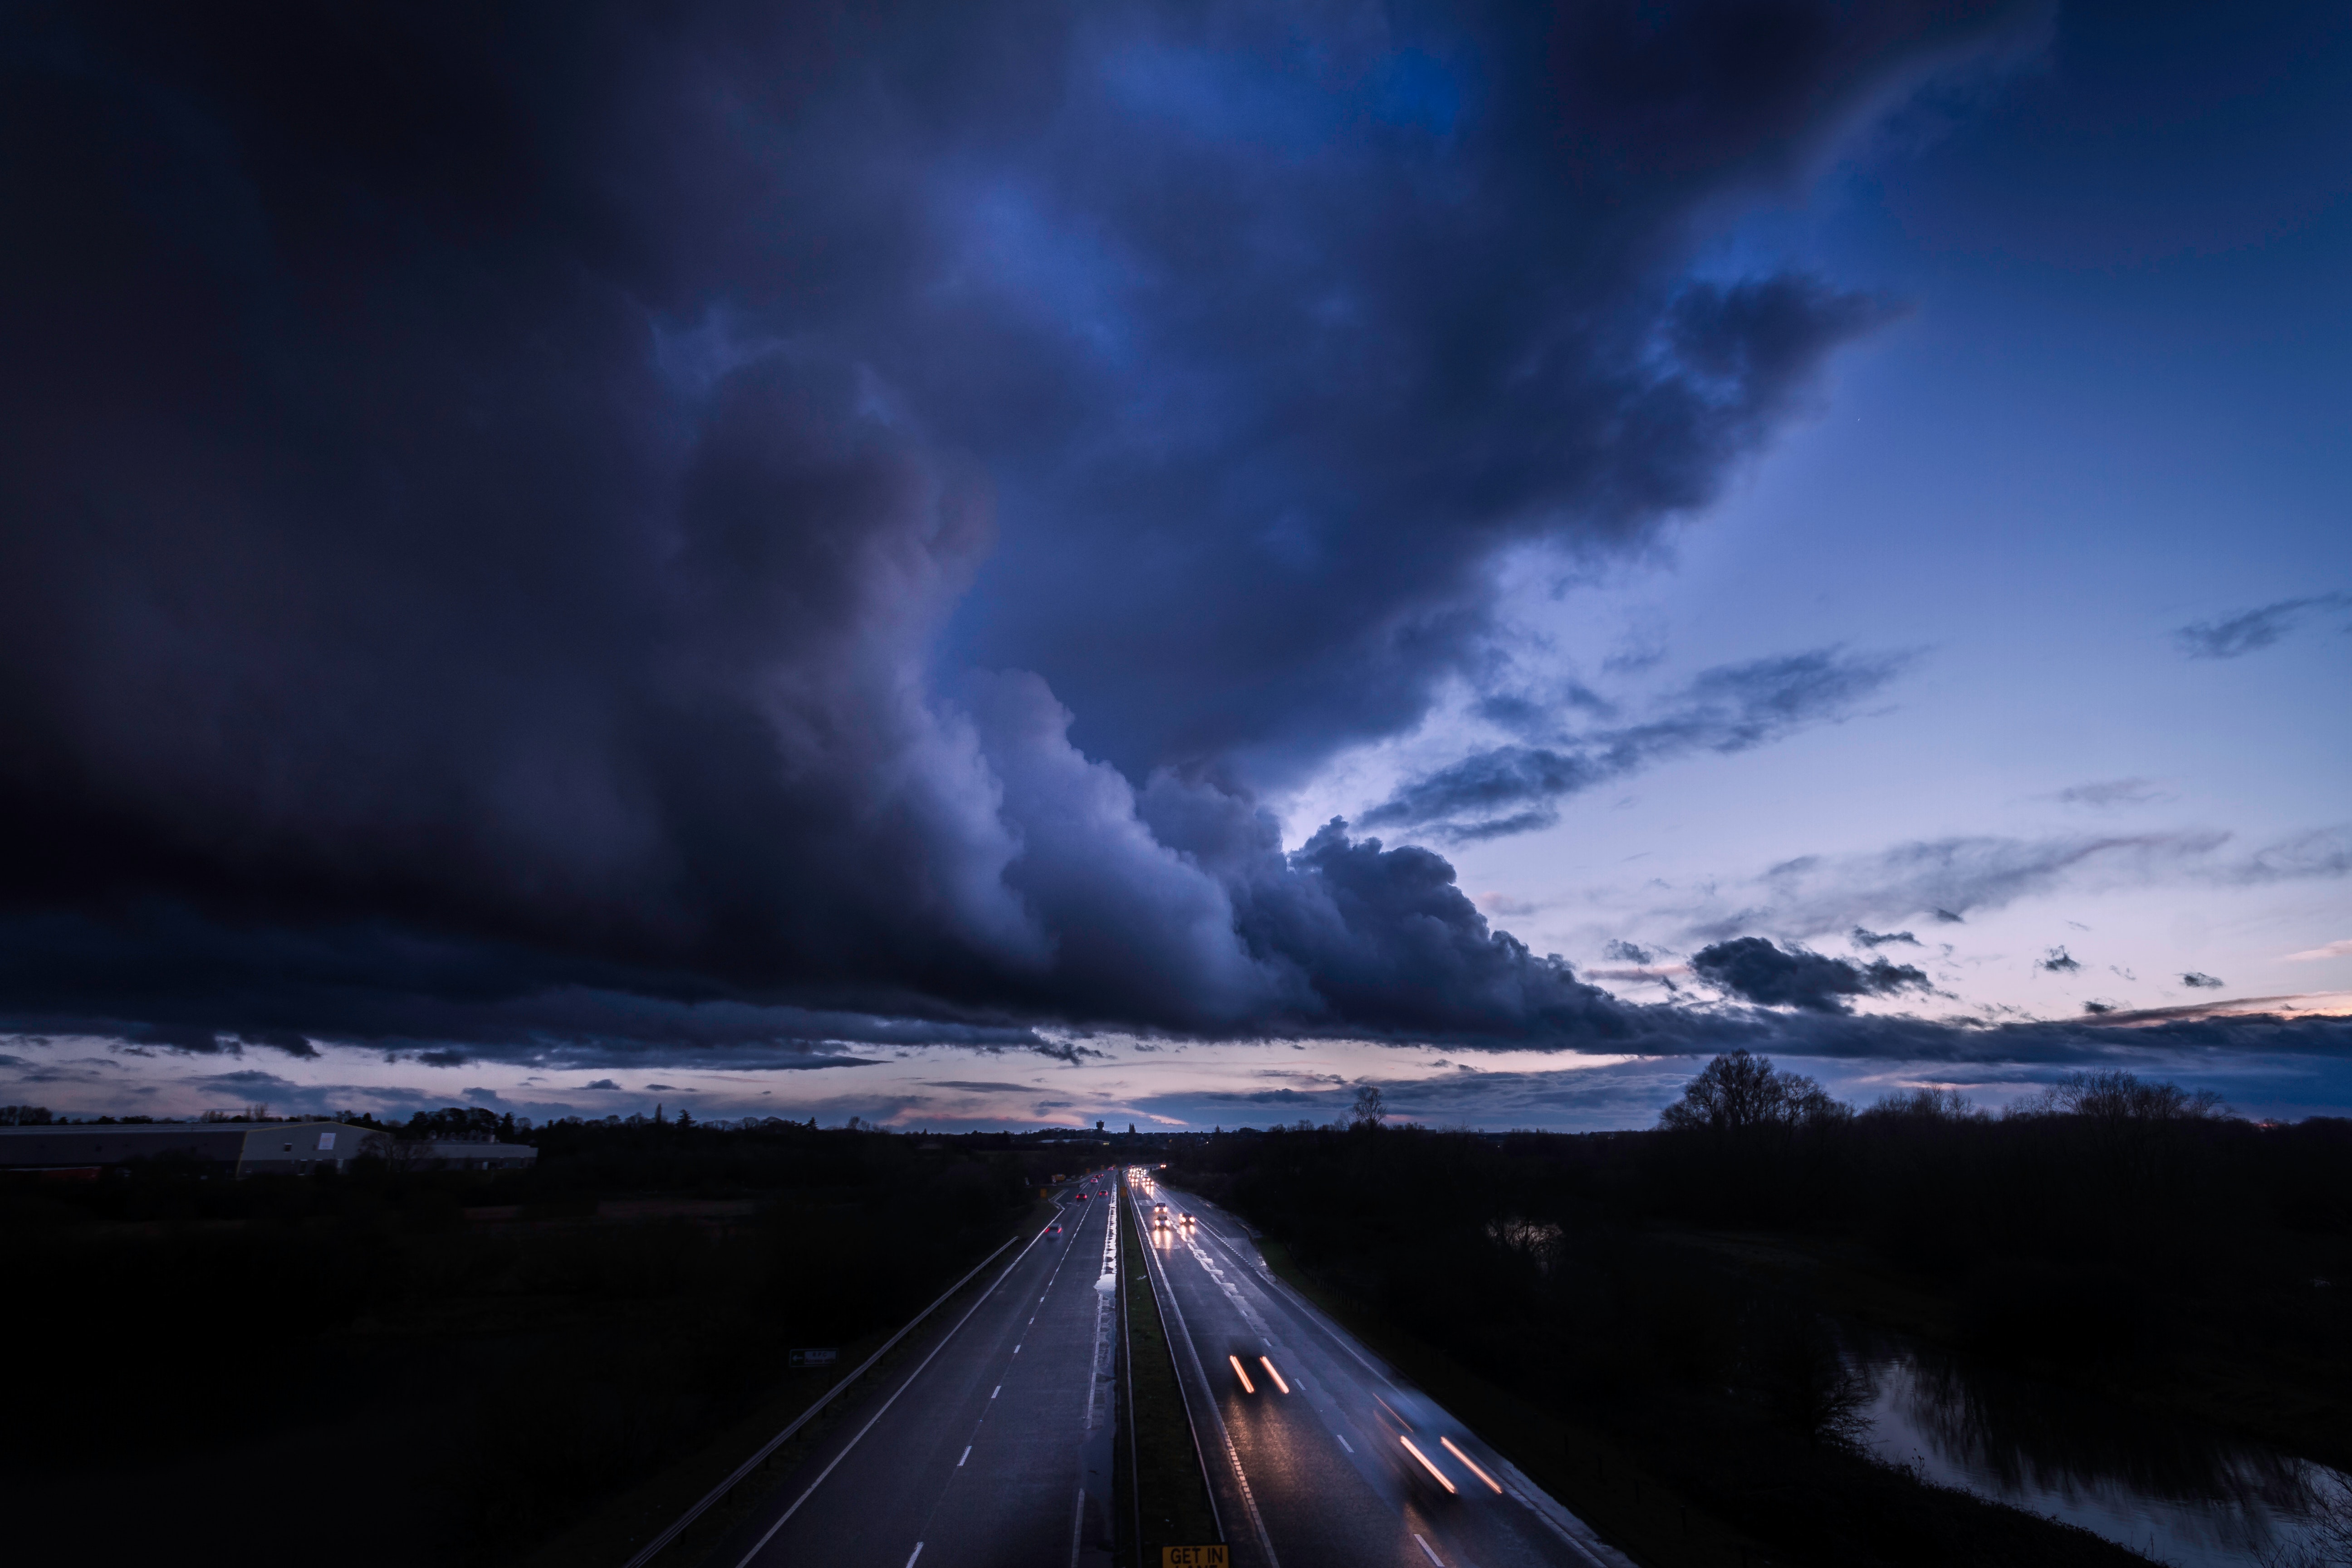 horizon, cities, clouds, road, traffic, movement, mainly cloudy, overcast